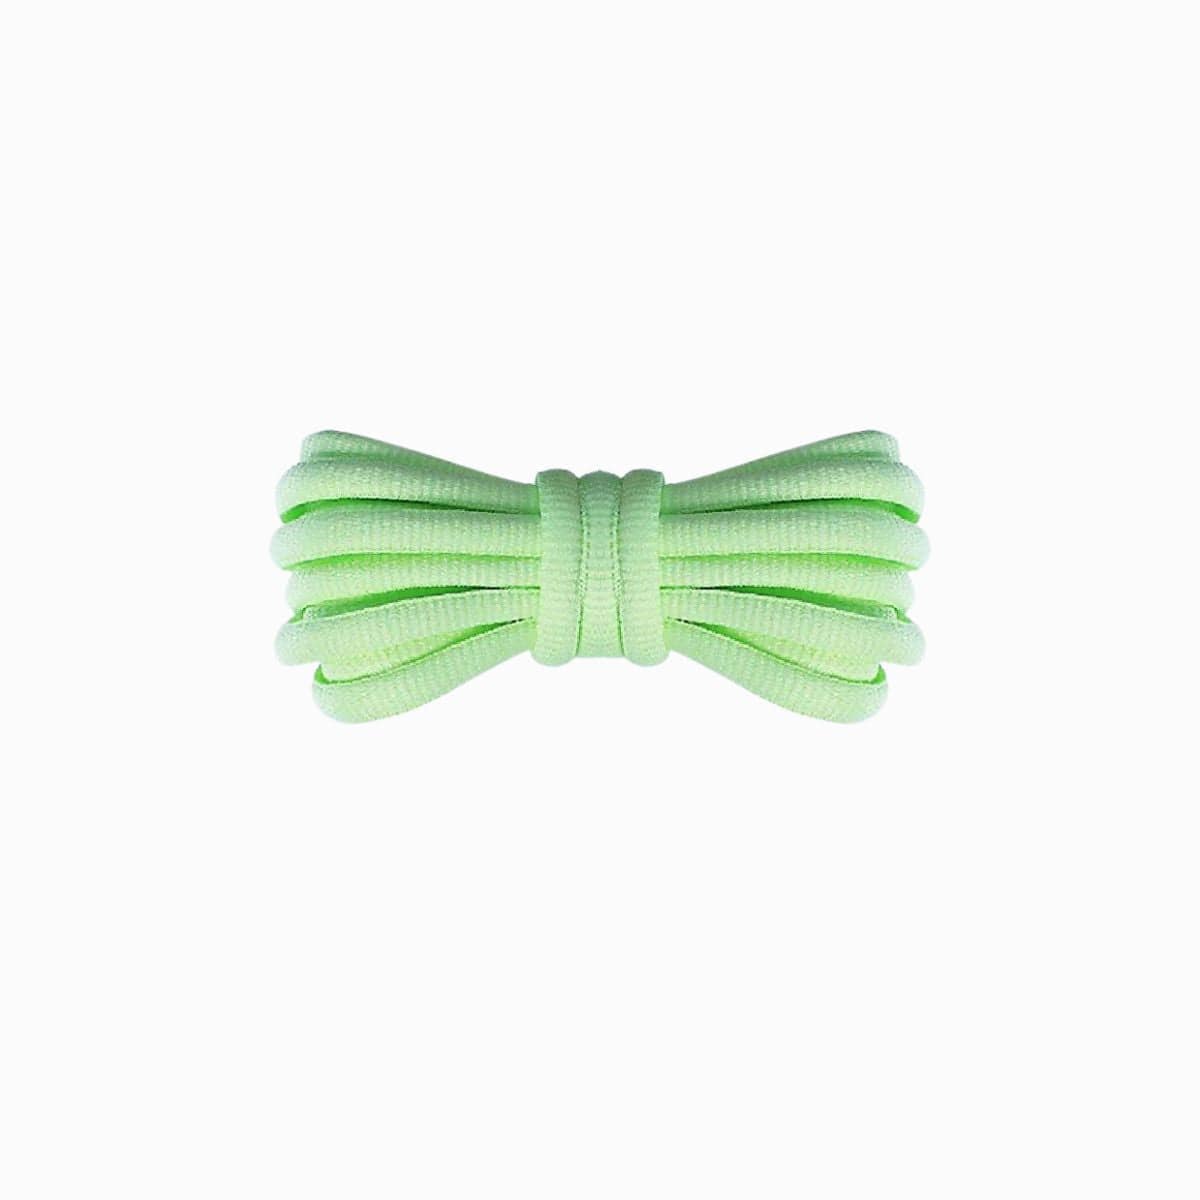 Light Green Replacement Adidas Shoe Laces for Adidas Spezial Sneakers by Kicks Shoelaces